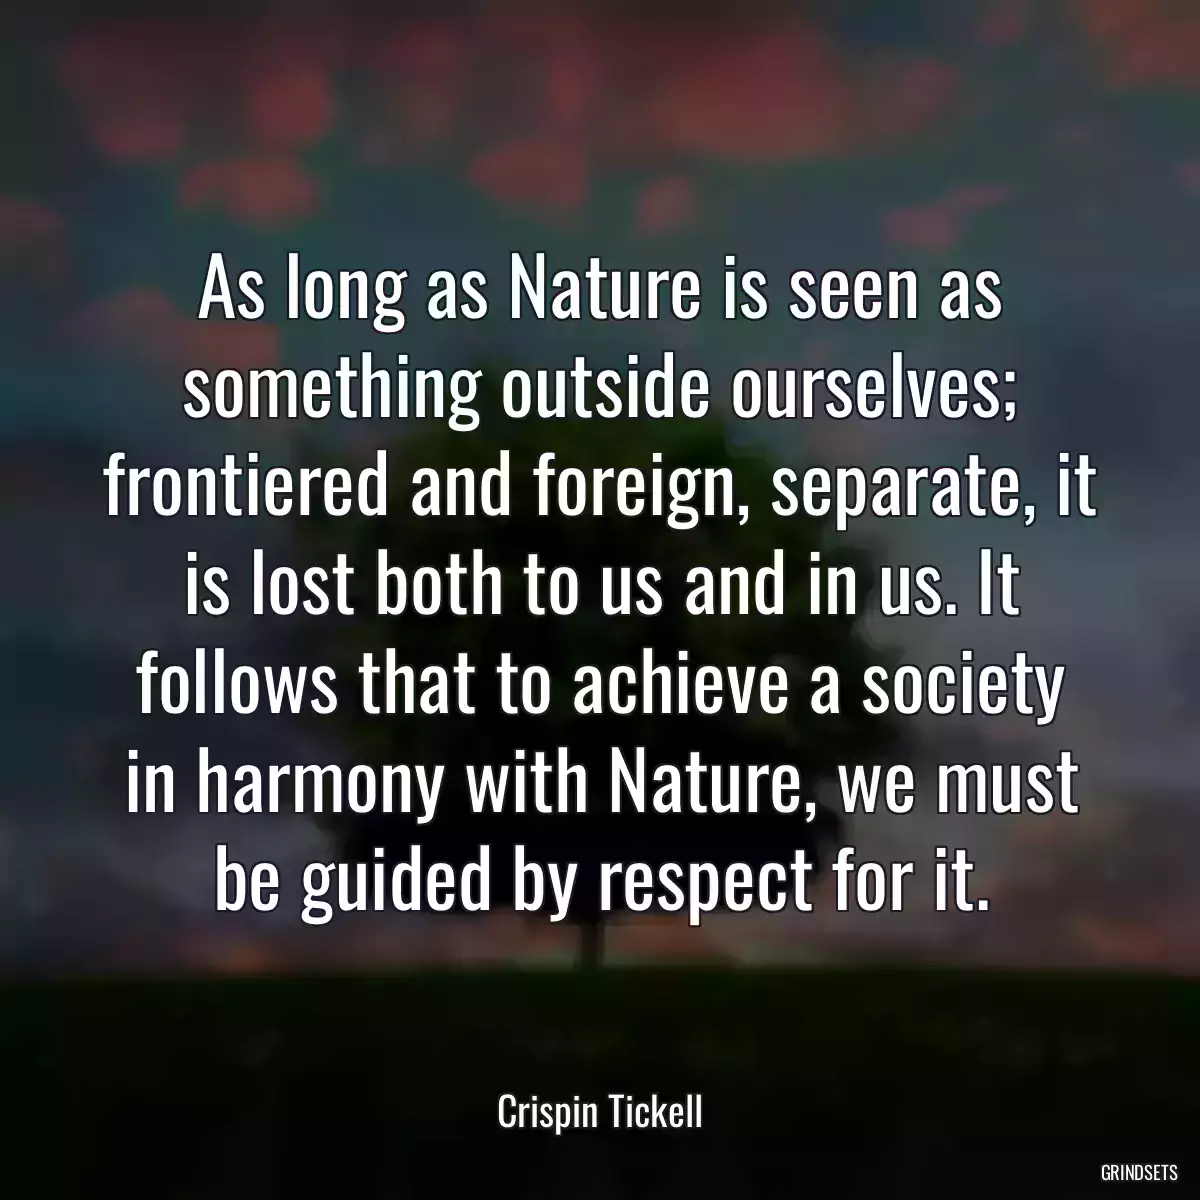 As long as Nature is seen as something outside ourselves; frontiered and foreign, separate, it is lost both to us and in us. It follows that to achieve a society in harmony with Nature, we must be guided by respect for it.